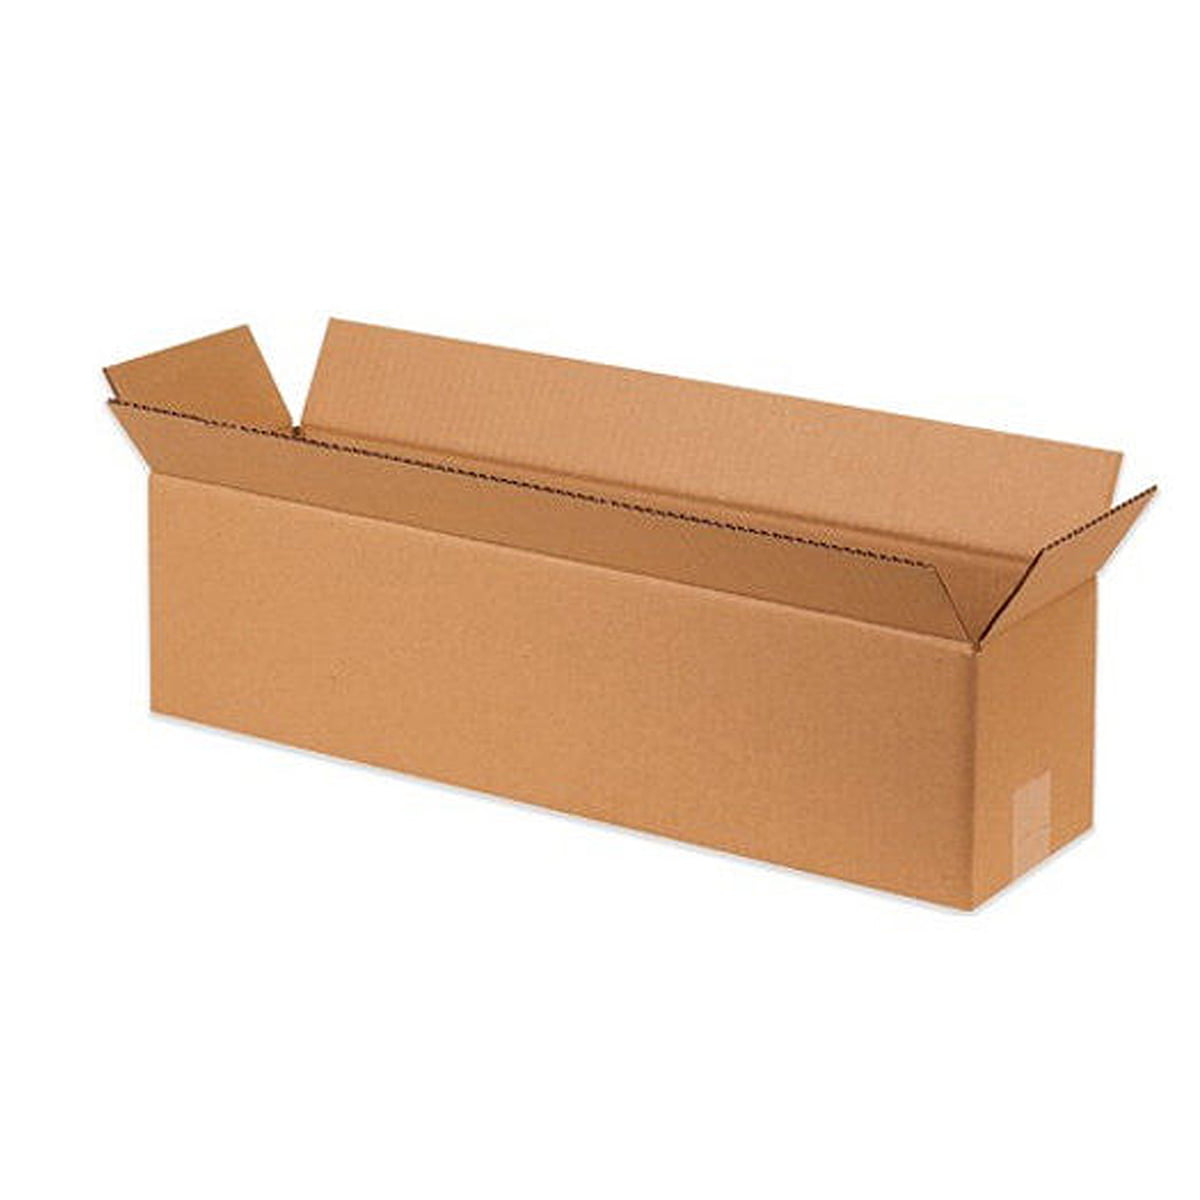 50-8 x 8 x 4 Shipping Boxes Packing Moving Storage Cartons Mailing Box 